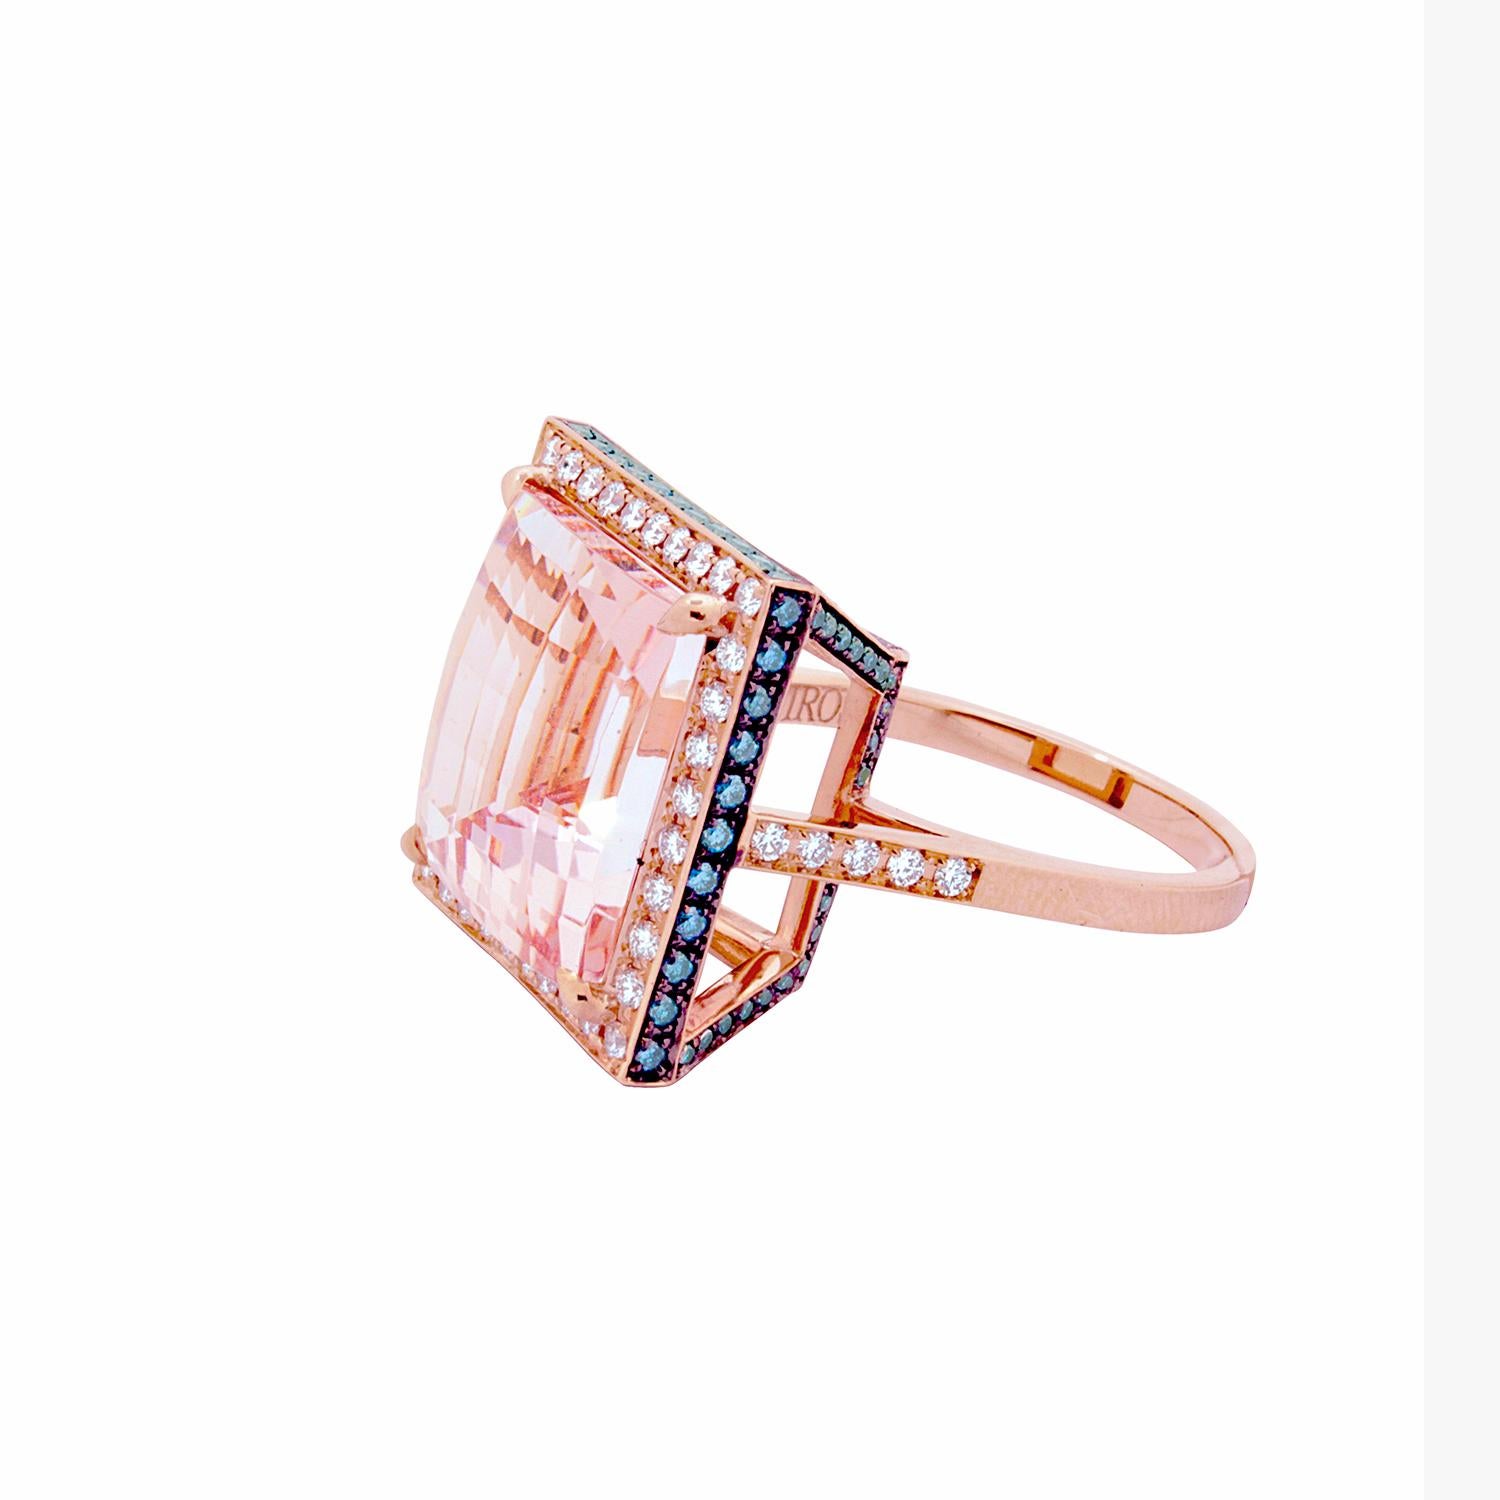 Dare we say pink? Sophisticated Blush Pink Cocktail Ring. One PONIROS ring, handcrafted in 18 carat rose gold set with White & Blue Diamonds and Morganite. 
Description of Gemstones –
White Round Brilliant Cut Diamonds, total carat weight – 0.41ct